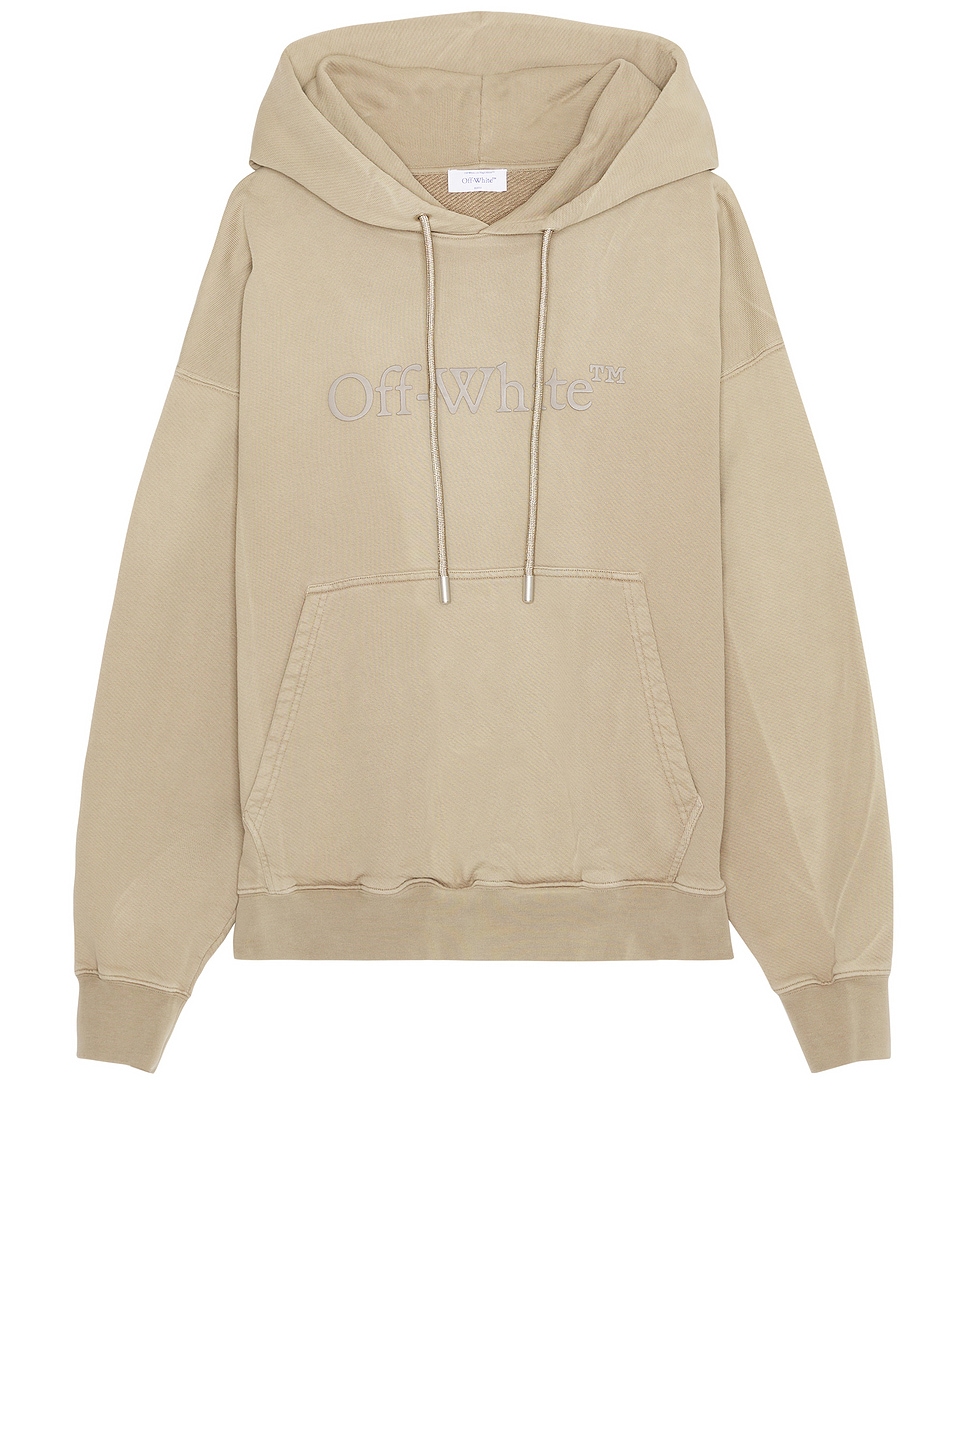 Image 1 of OFF-WHITE Laundry Skate Hoodie in Beige